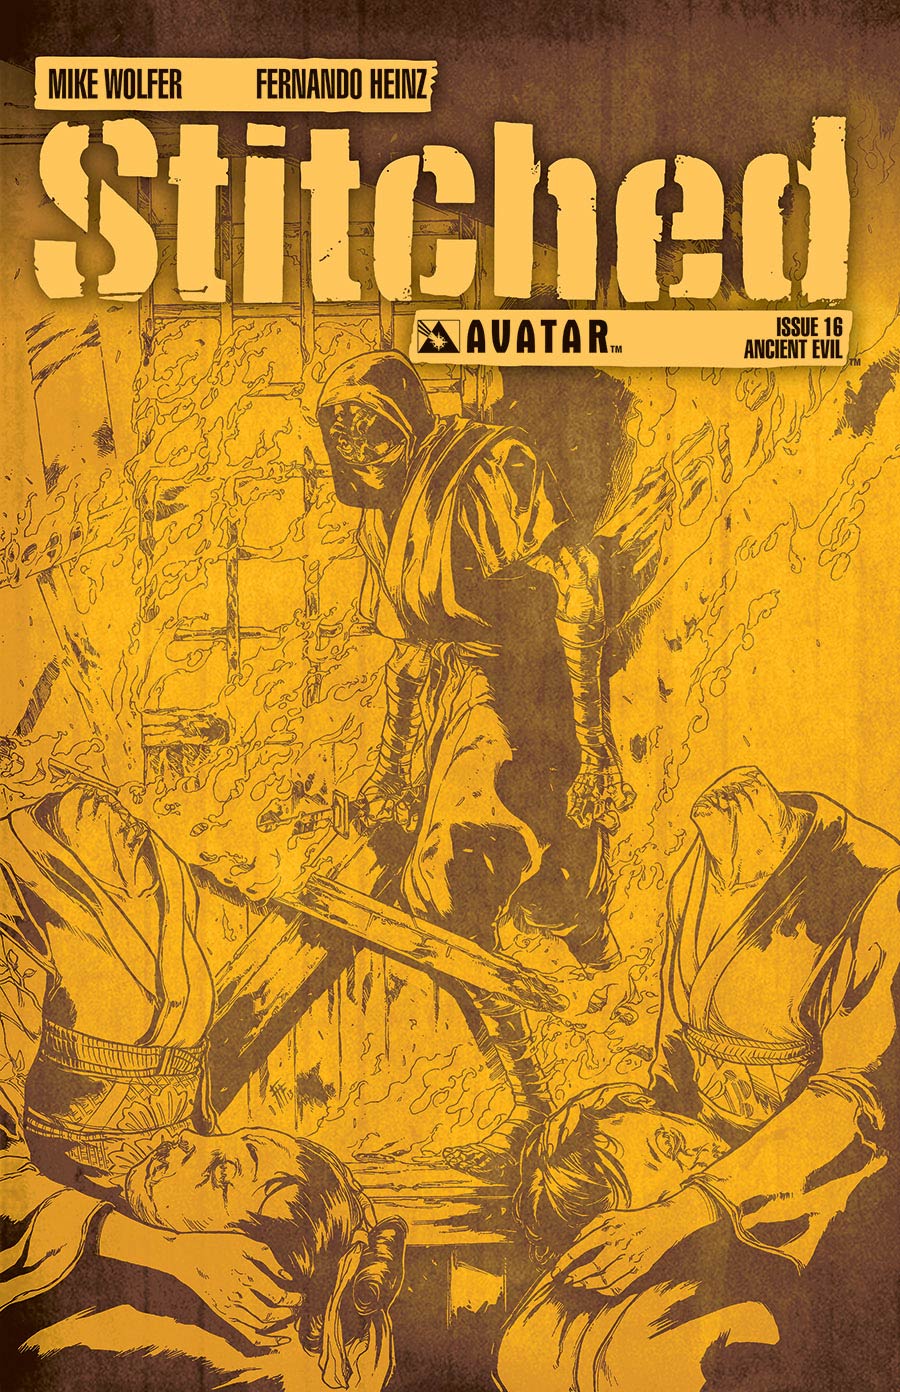 Stitched #16 Ancient Evil Cover (Sale Edition)